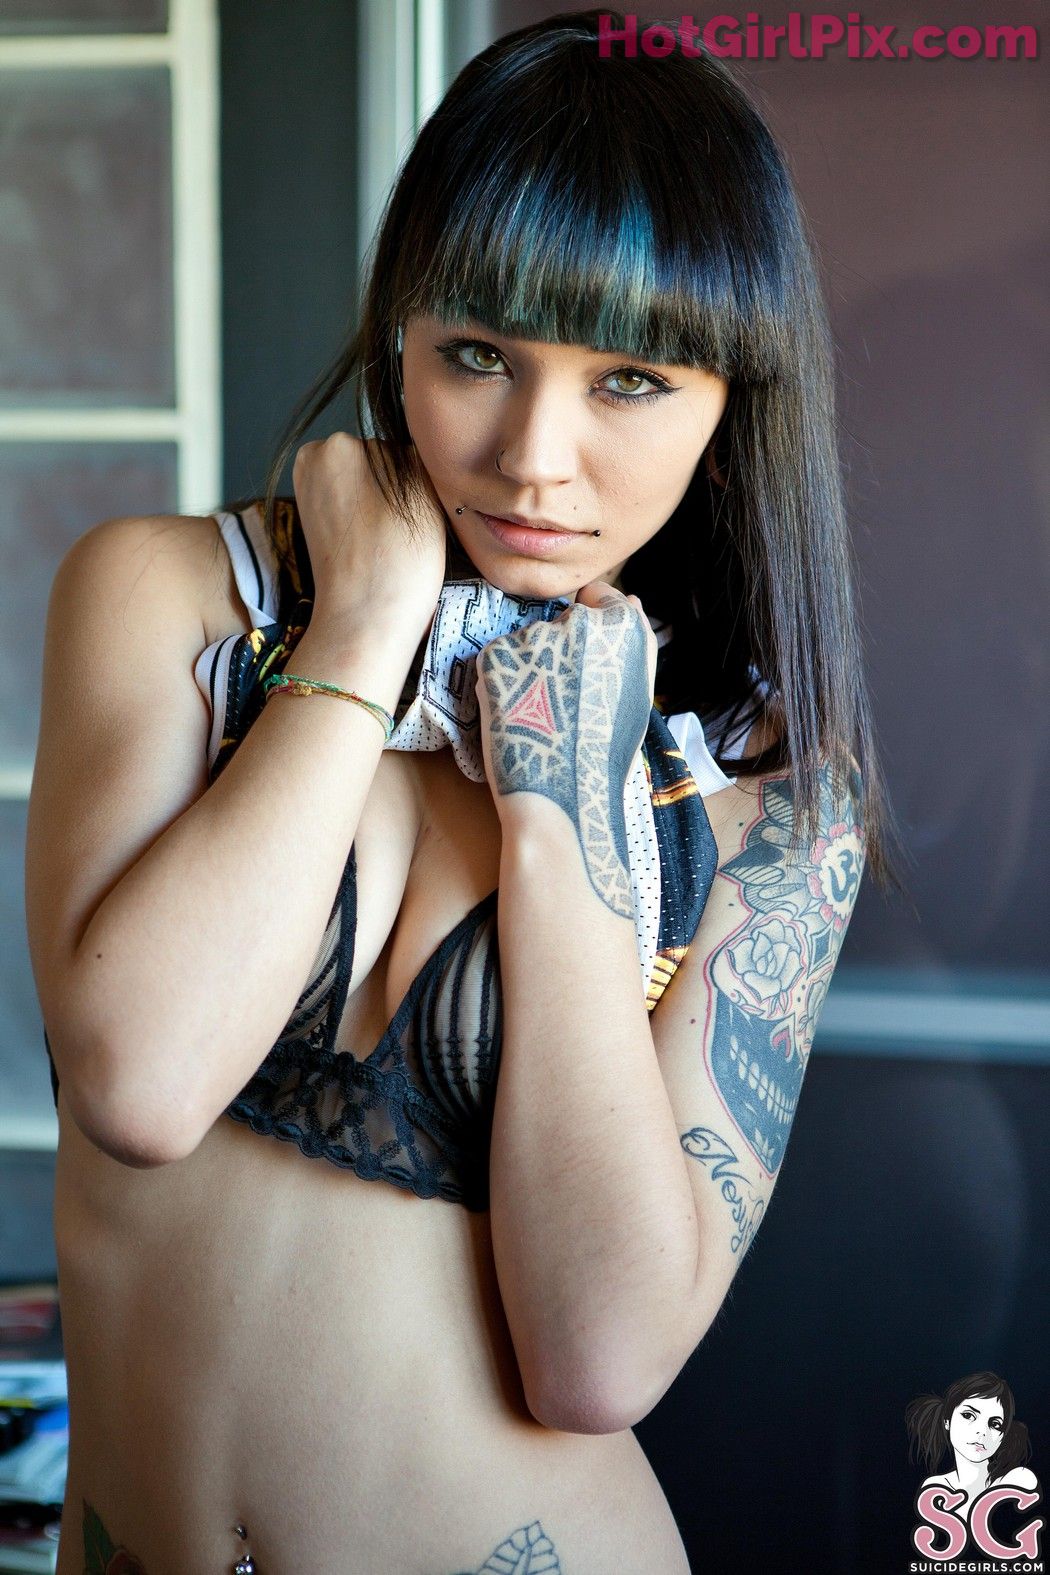 [Suicide Girls] Fishball - That Feel